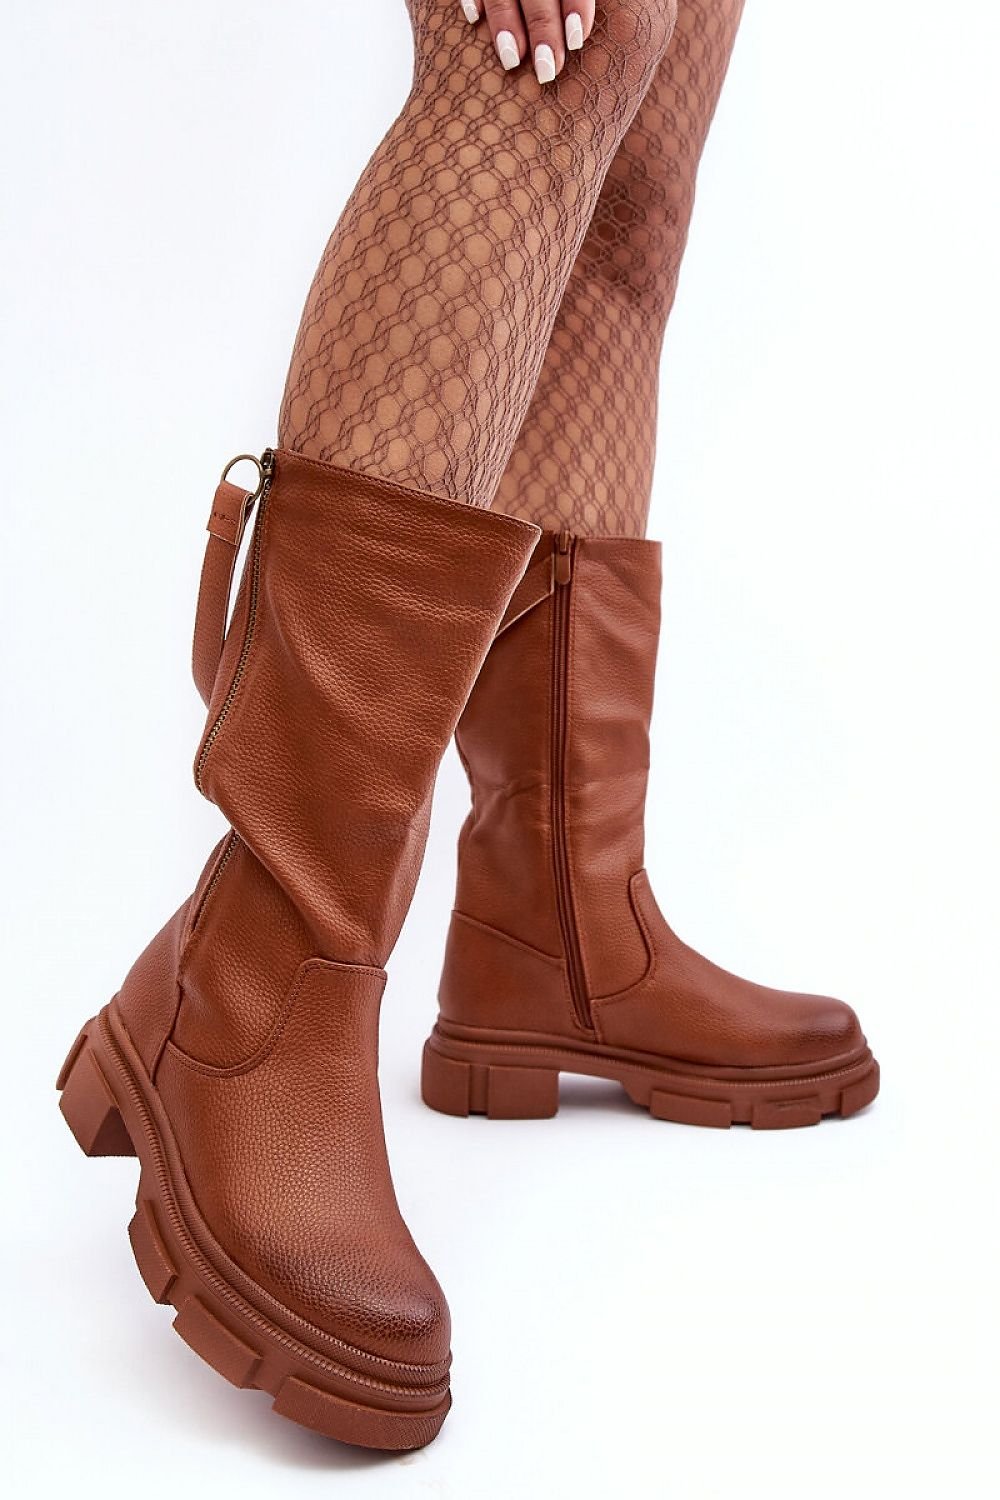 Thigh-Hight Boots Step in style